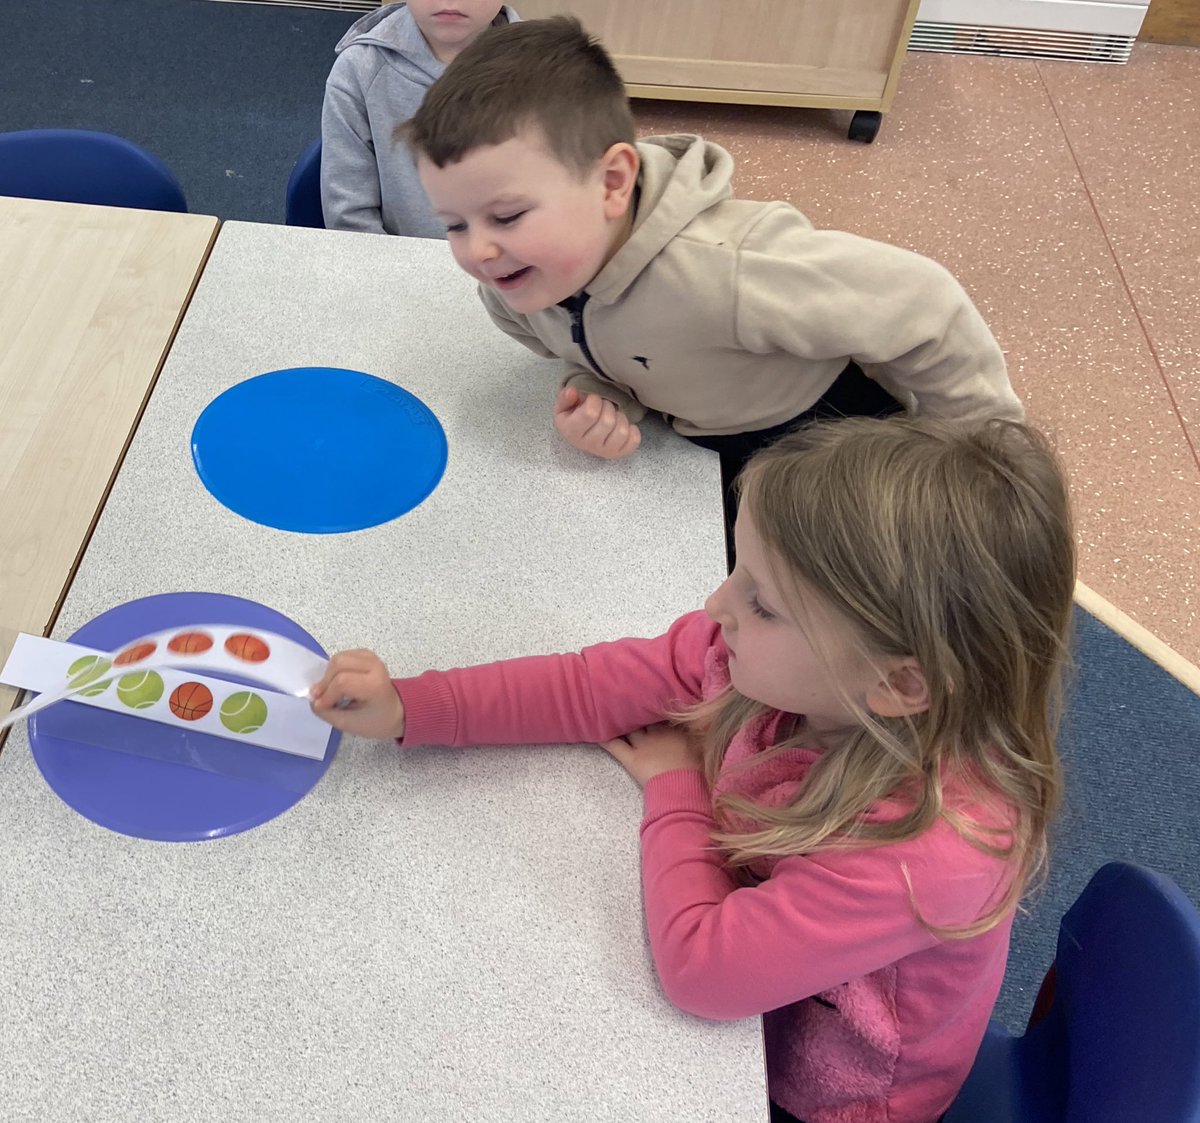 Despite having to adapt and stay indoors due to the icy weather our year 1 children enjoyed an active maths session based on fractions this week, lots of teamwork along with fantastic reasoning and explanations!👏🏼@mrscpearce